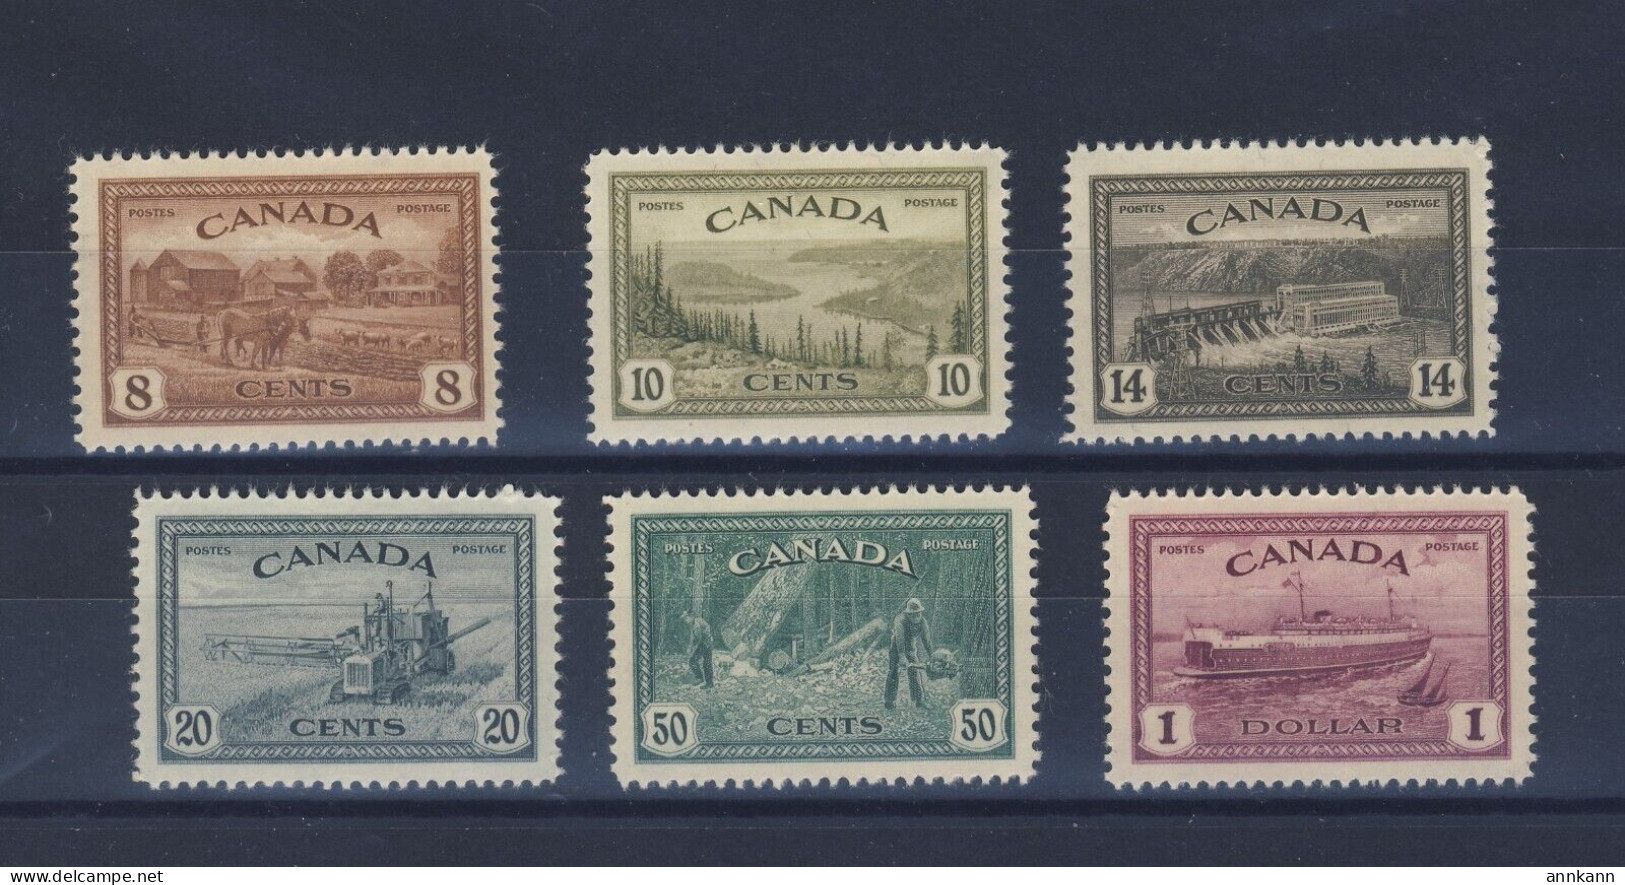 6x MH Canada Peace Issue Stamp Set #268 To #273 MH VF Guide Value = $85.00 - Unused Stamps